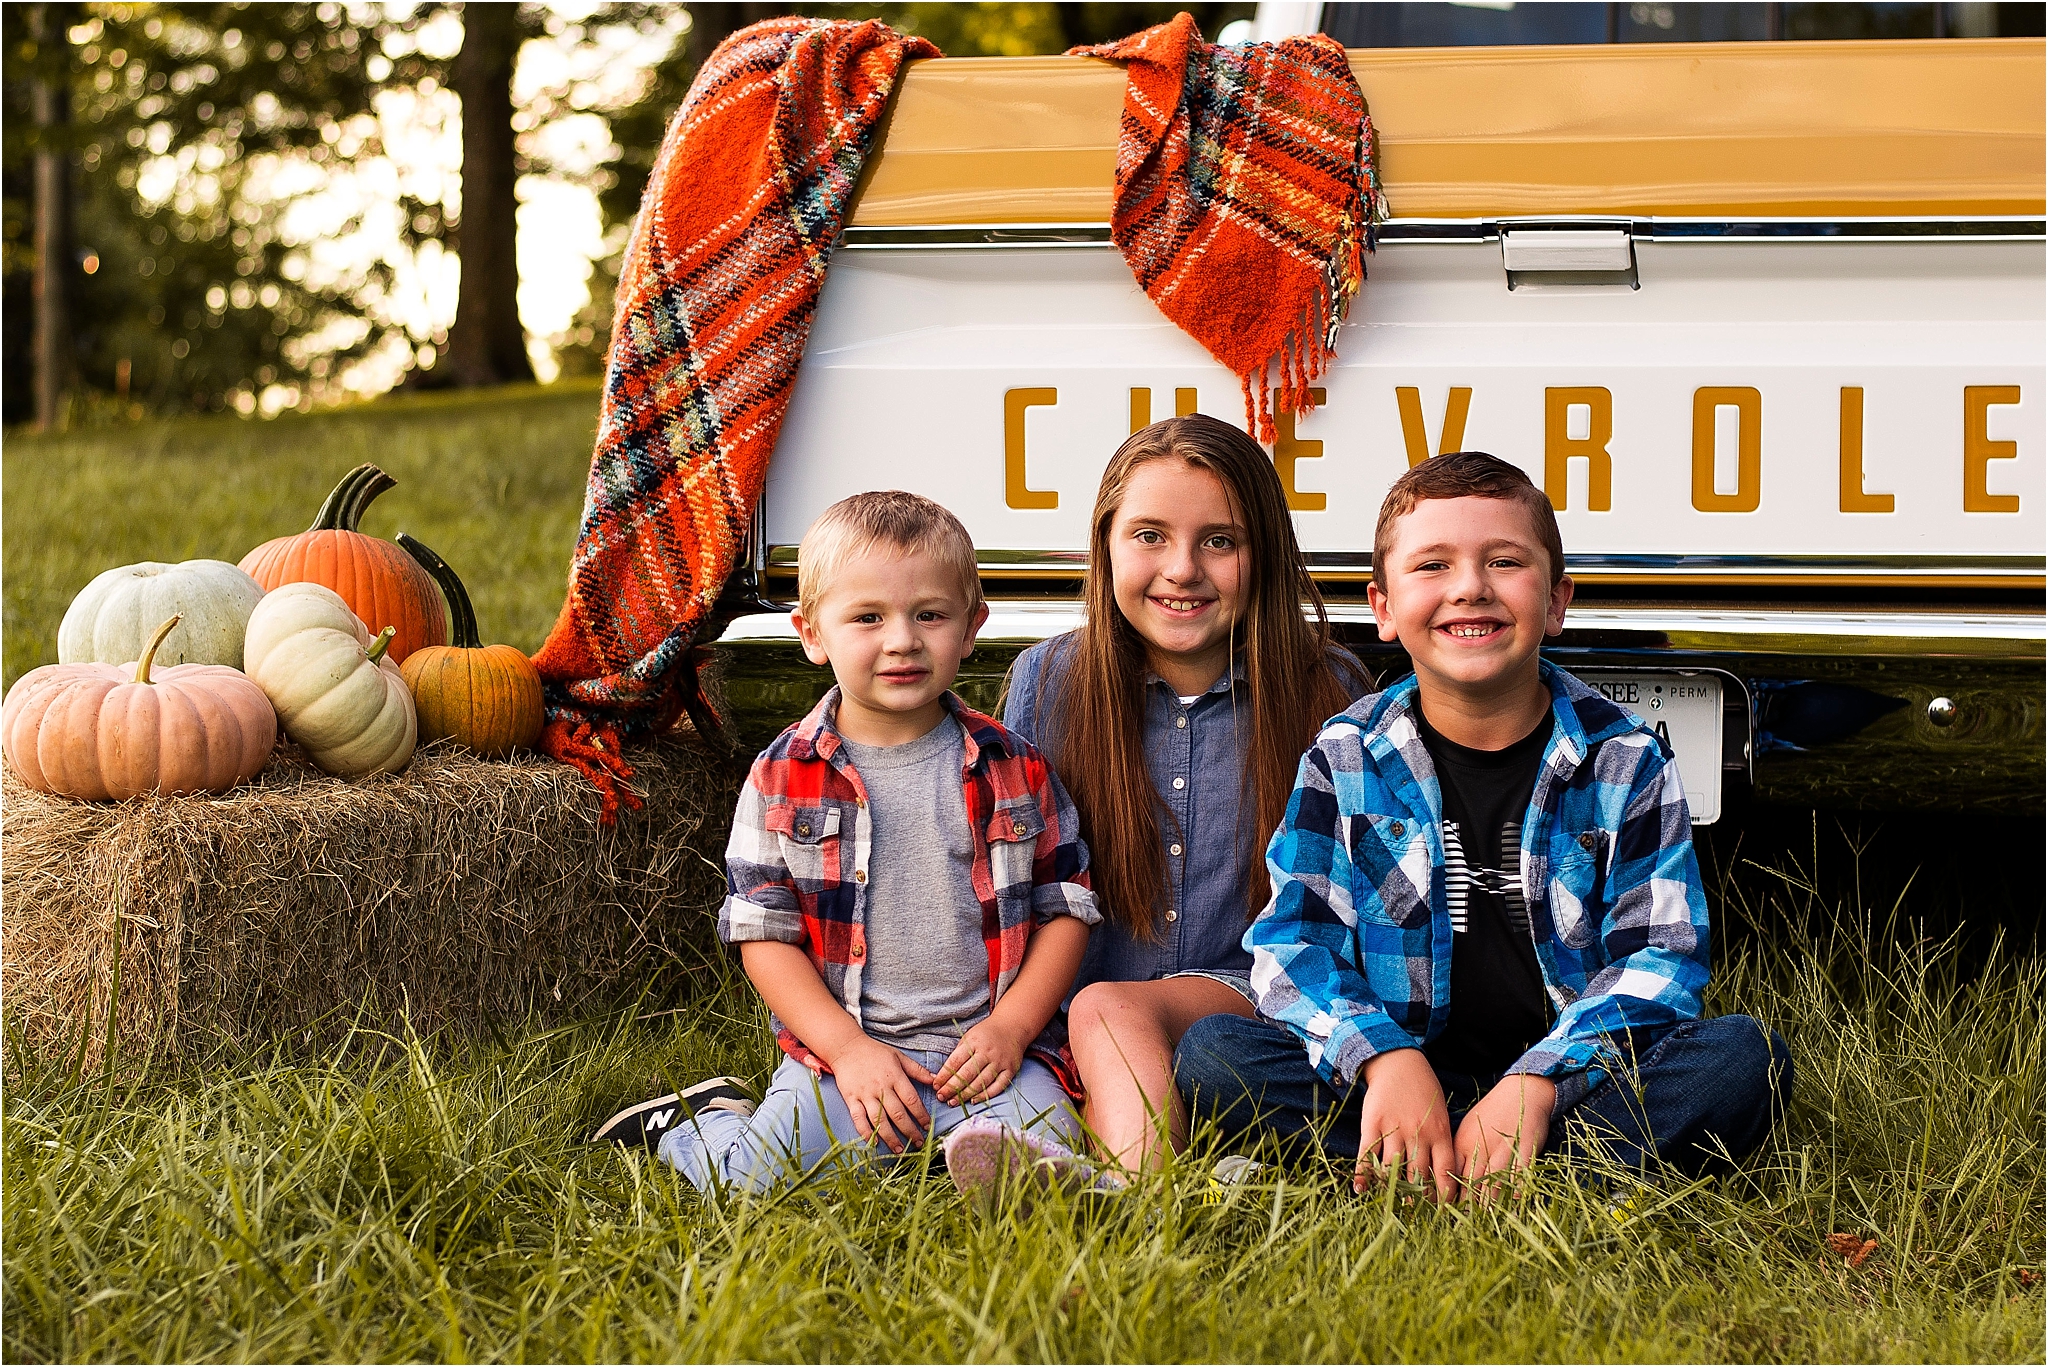 clarksville family photographer, fort campbell family pictures, fall minis